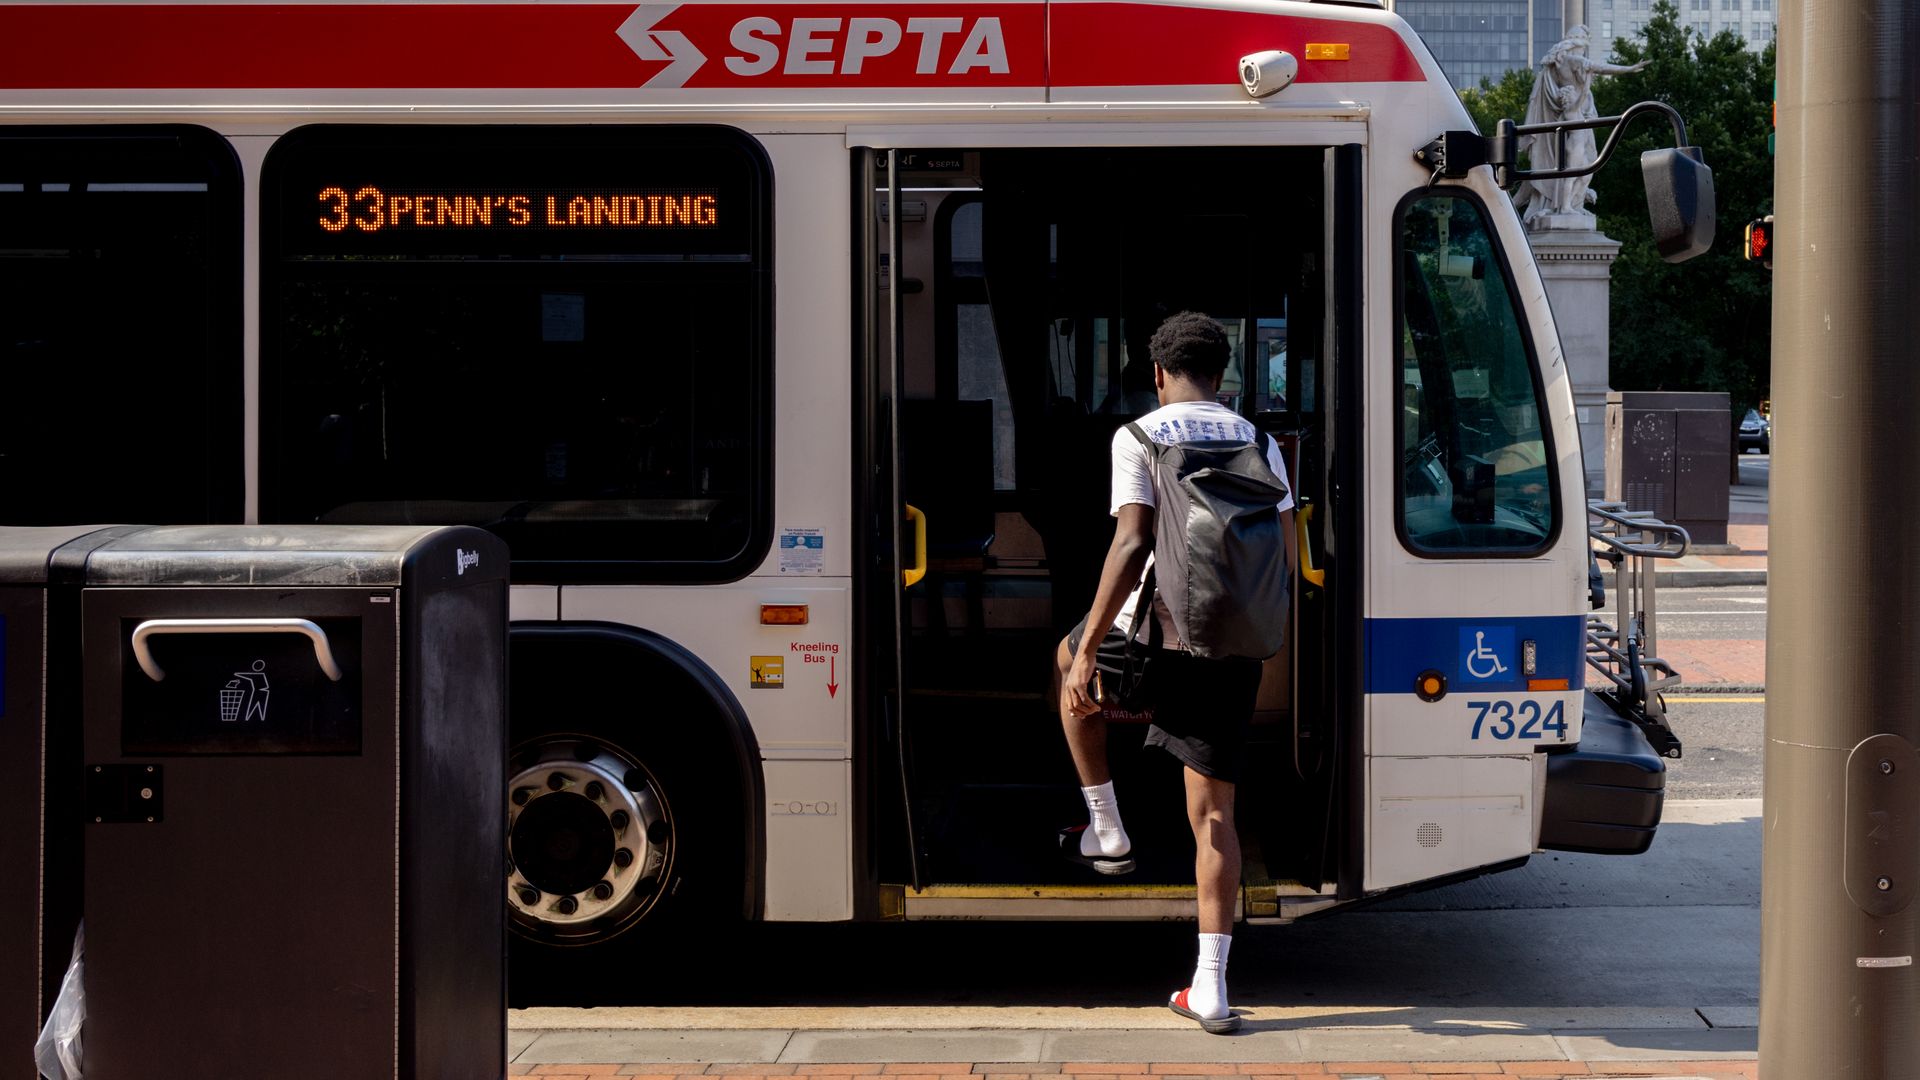 A commuter boards a SEPTA bus in Philadelphia over the summer.